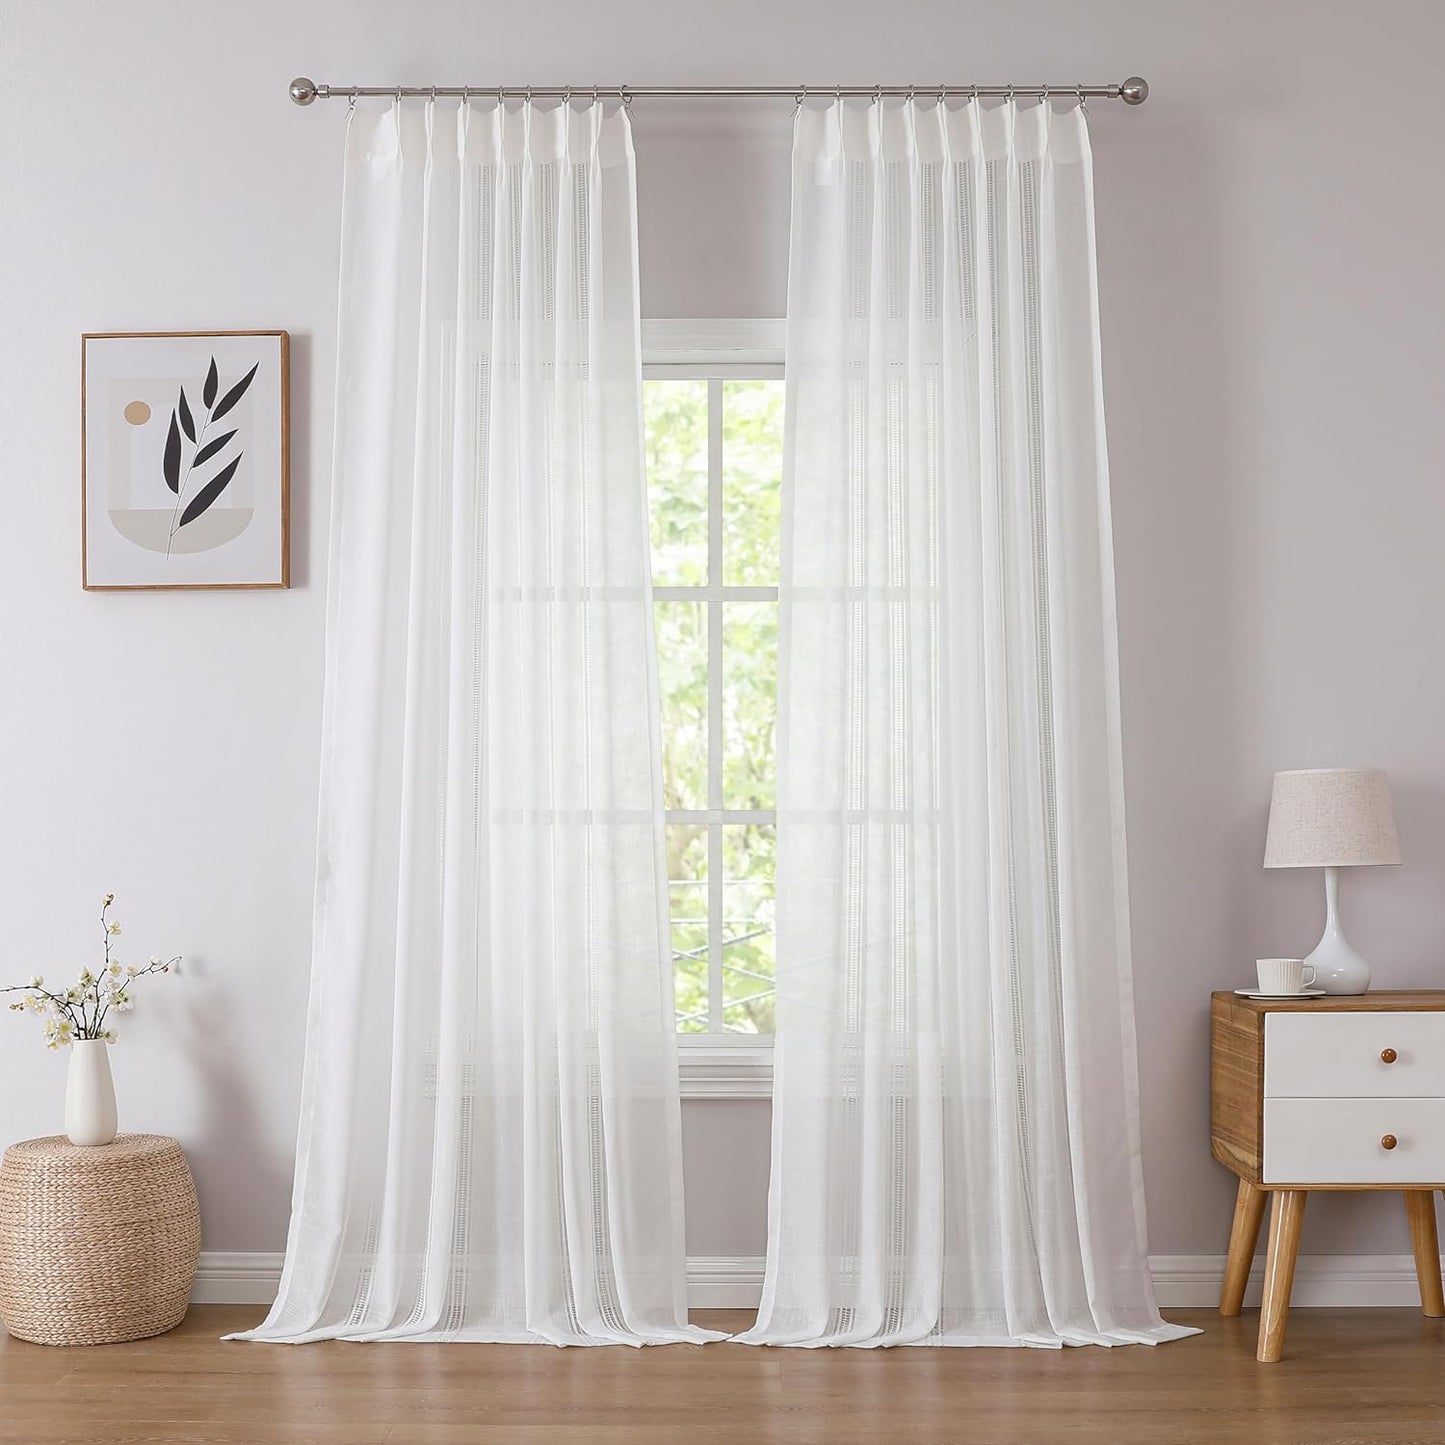 Kayne Studio Boho 2 Pages Sheer Pinch Pleated Curtains,Linen Blended 95 Inches Long Window Treatments,Light Filtering Pinch Pleat Drapes for Farmhouse Living Room 36" W X 90" L,18 Hooks,Beige  Kayne Studio White 36"X95"X2 